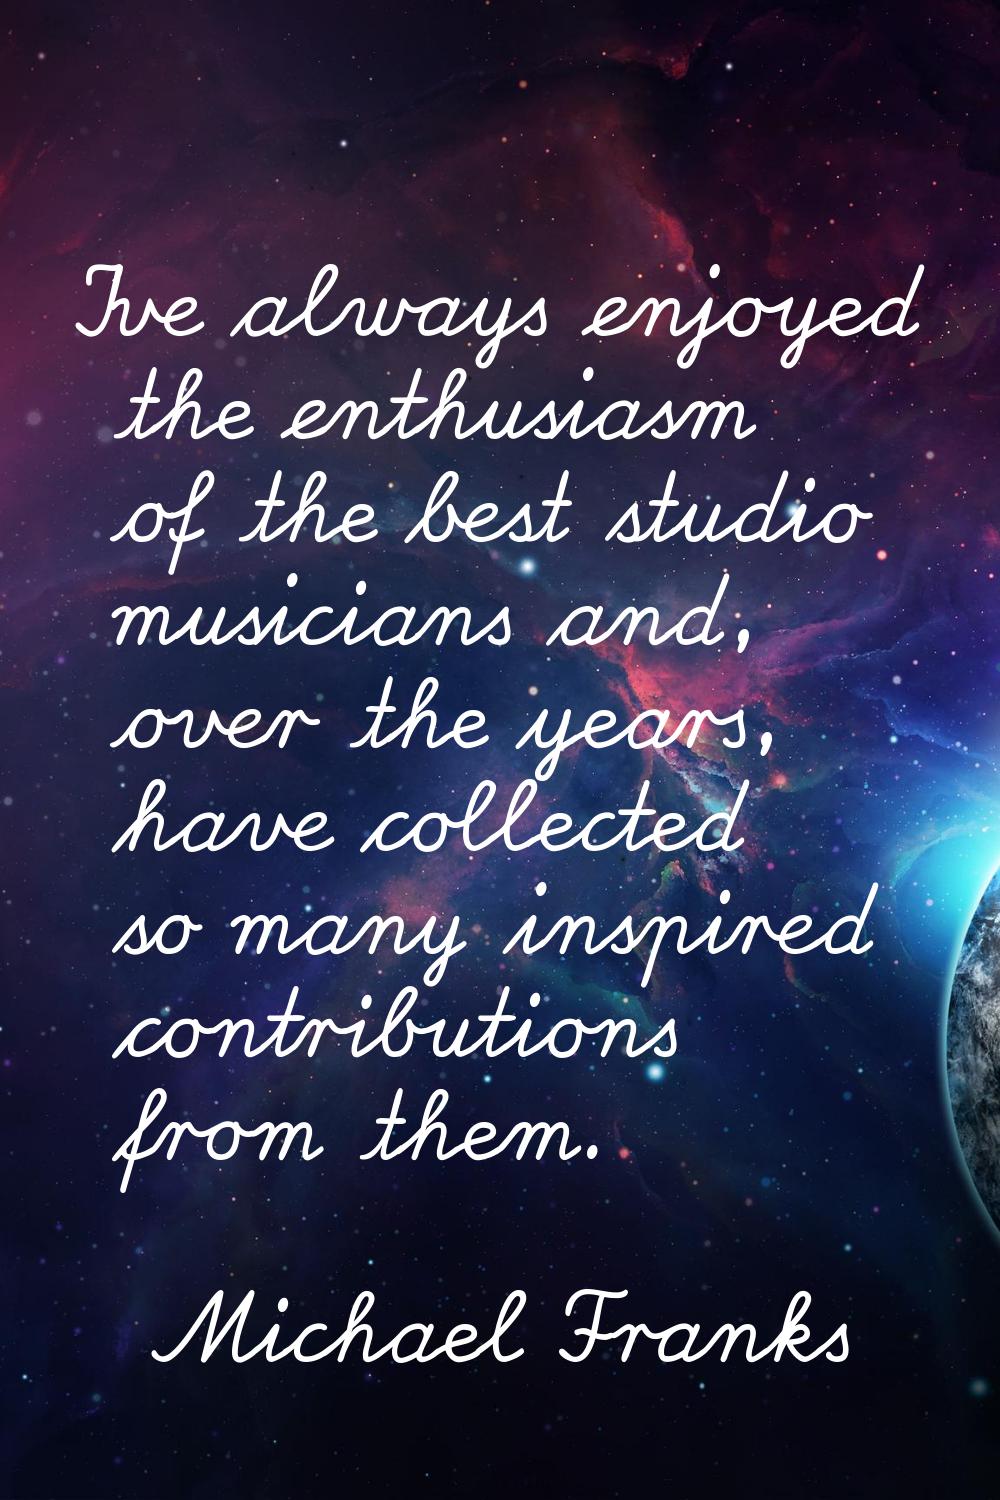 I've always enjoyed the enthusiasm of the best studio musicians and, over the years, have collected